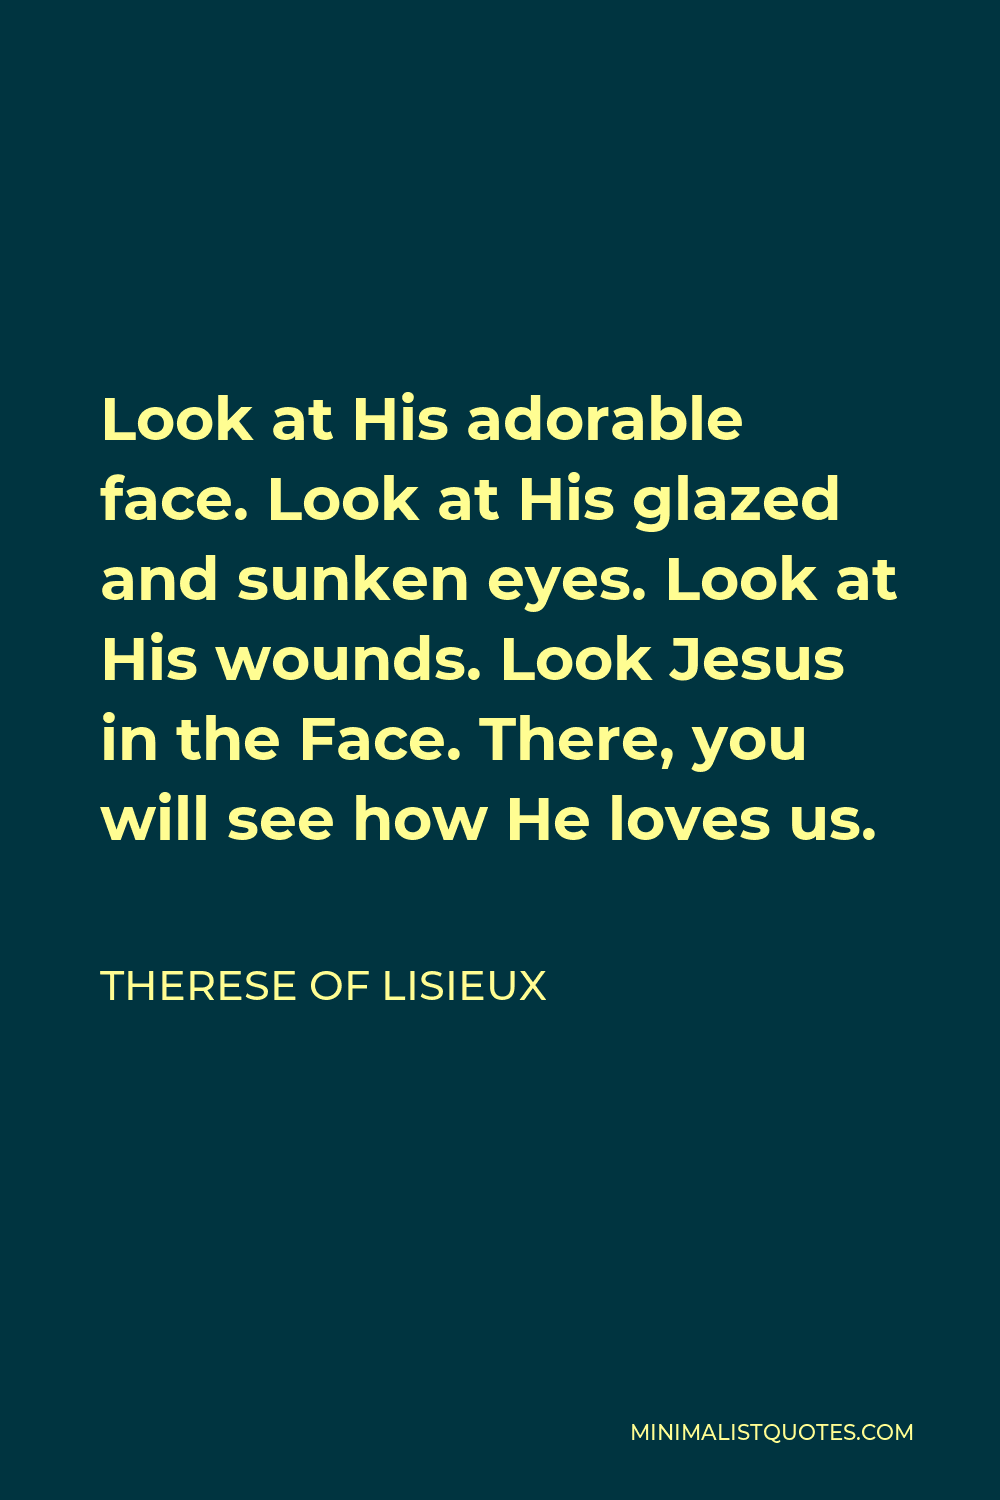 Therese of Lisieux Quote - Look at His adorable face. Look at His glazed and sunken eyes. Look at His wounds. Look Jesus in the Face. There, you will see how He loves us.